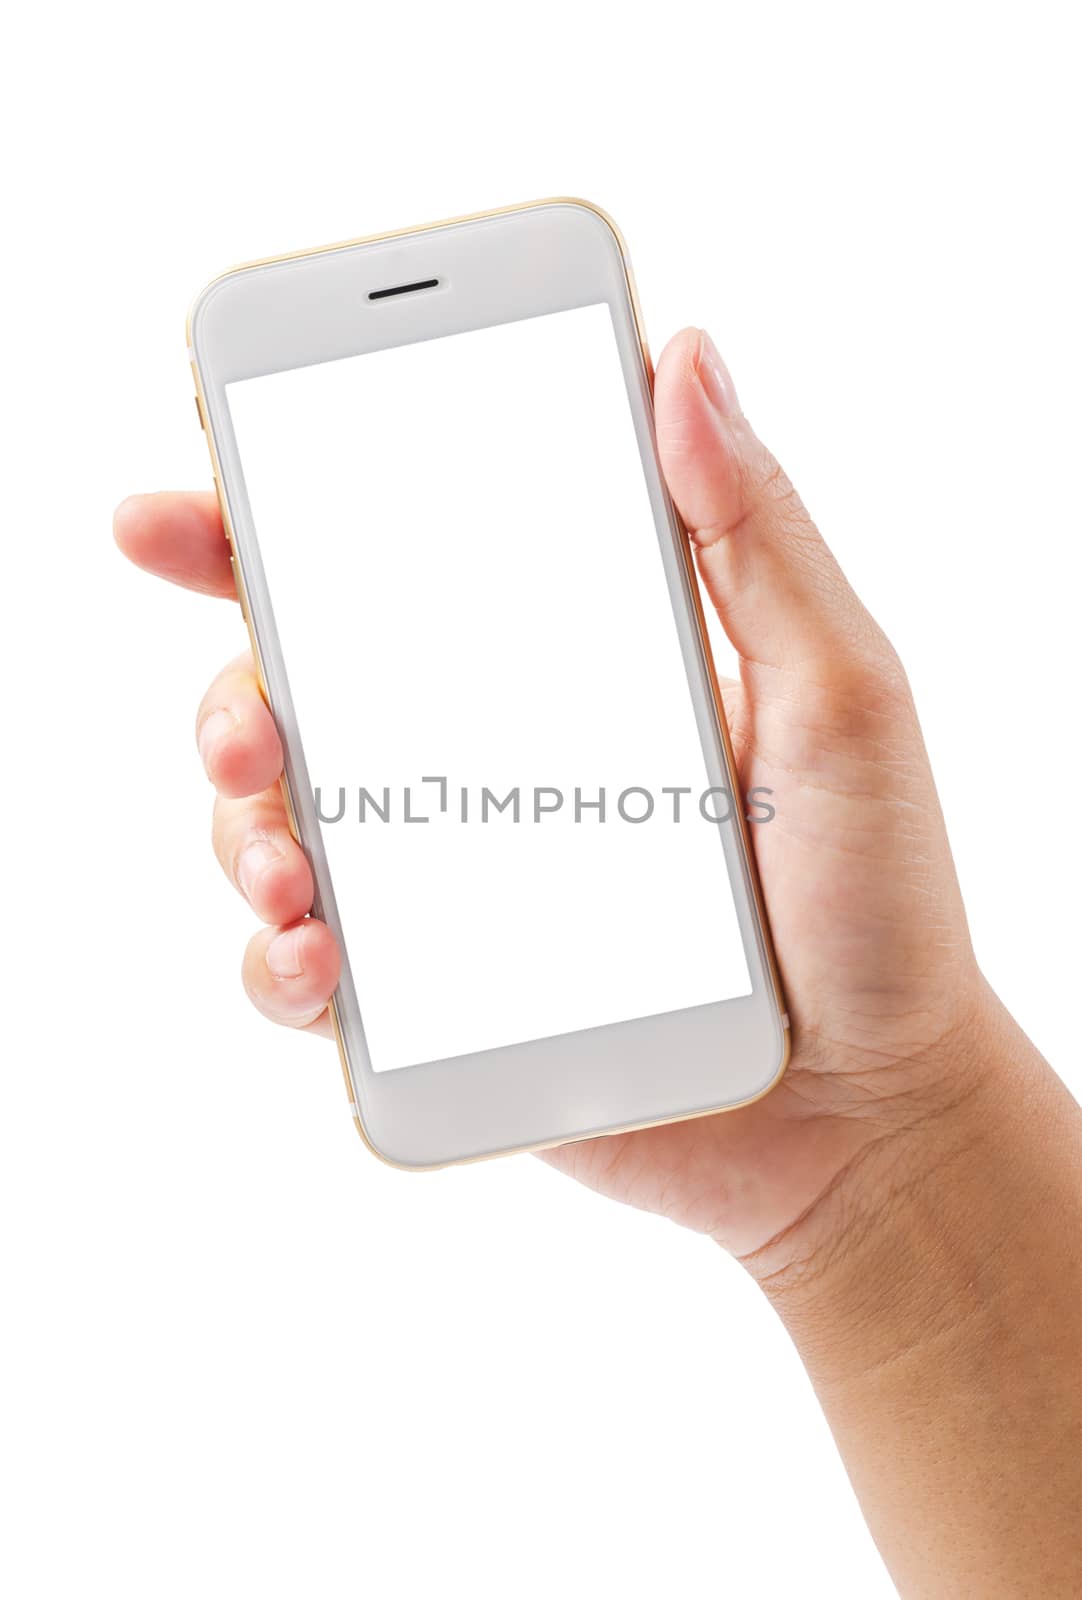 closeup hand using phone isolated on white background. by Gamjai